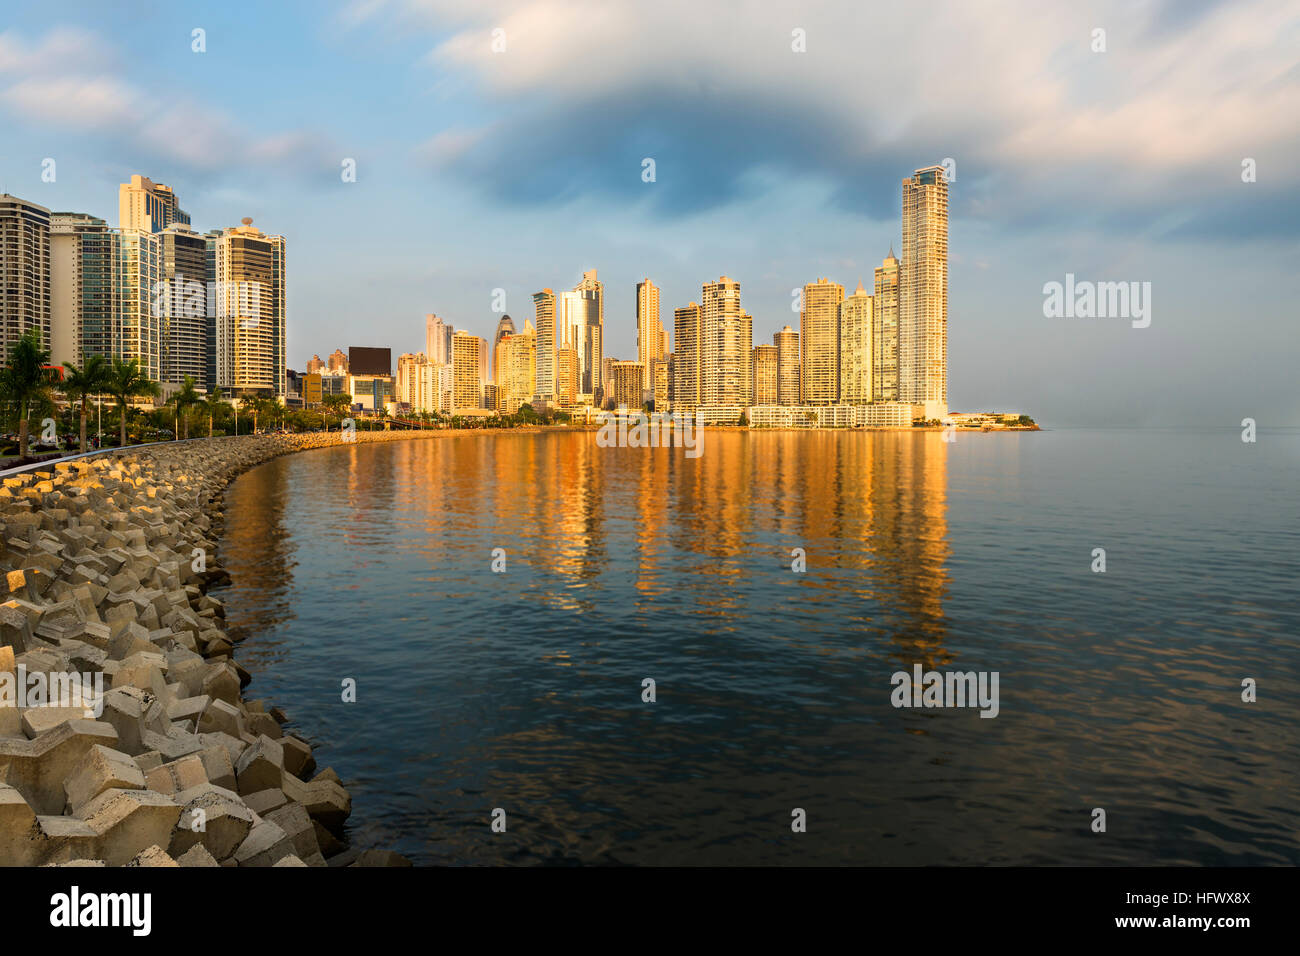 View of the financial district of Panama City, Panama. Stock Photo